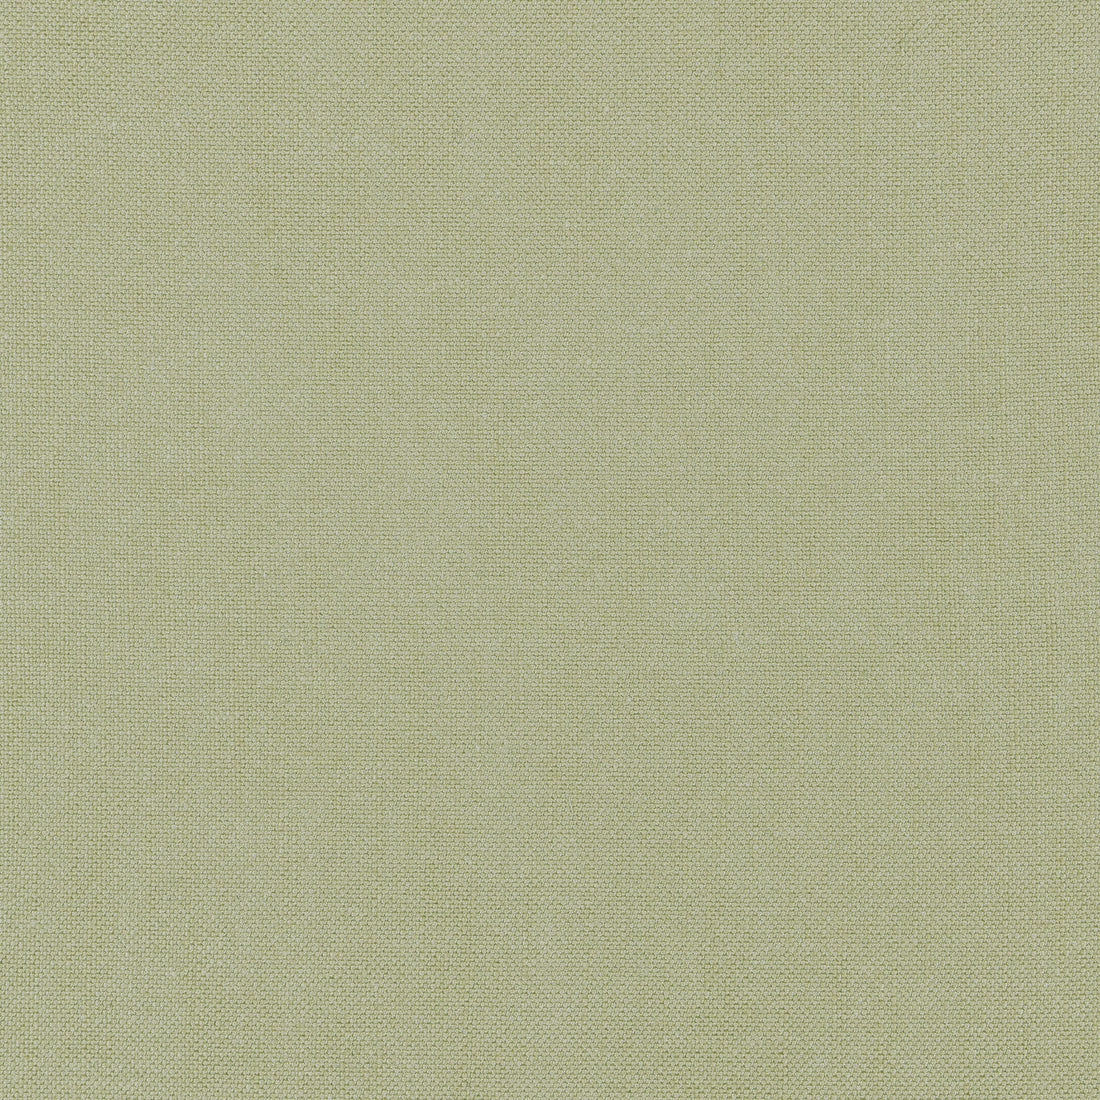 Palisade Linen fabric in moss color - pattern number FWW7655 - by Thibaut in the Palisades collection